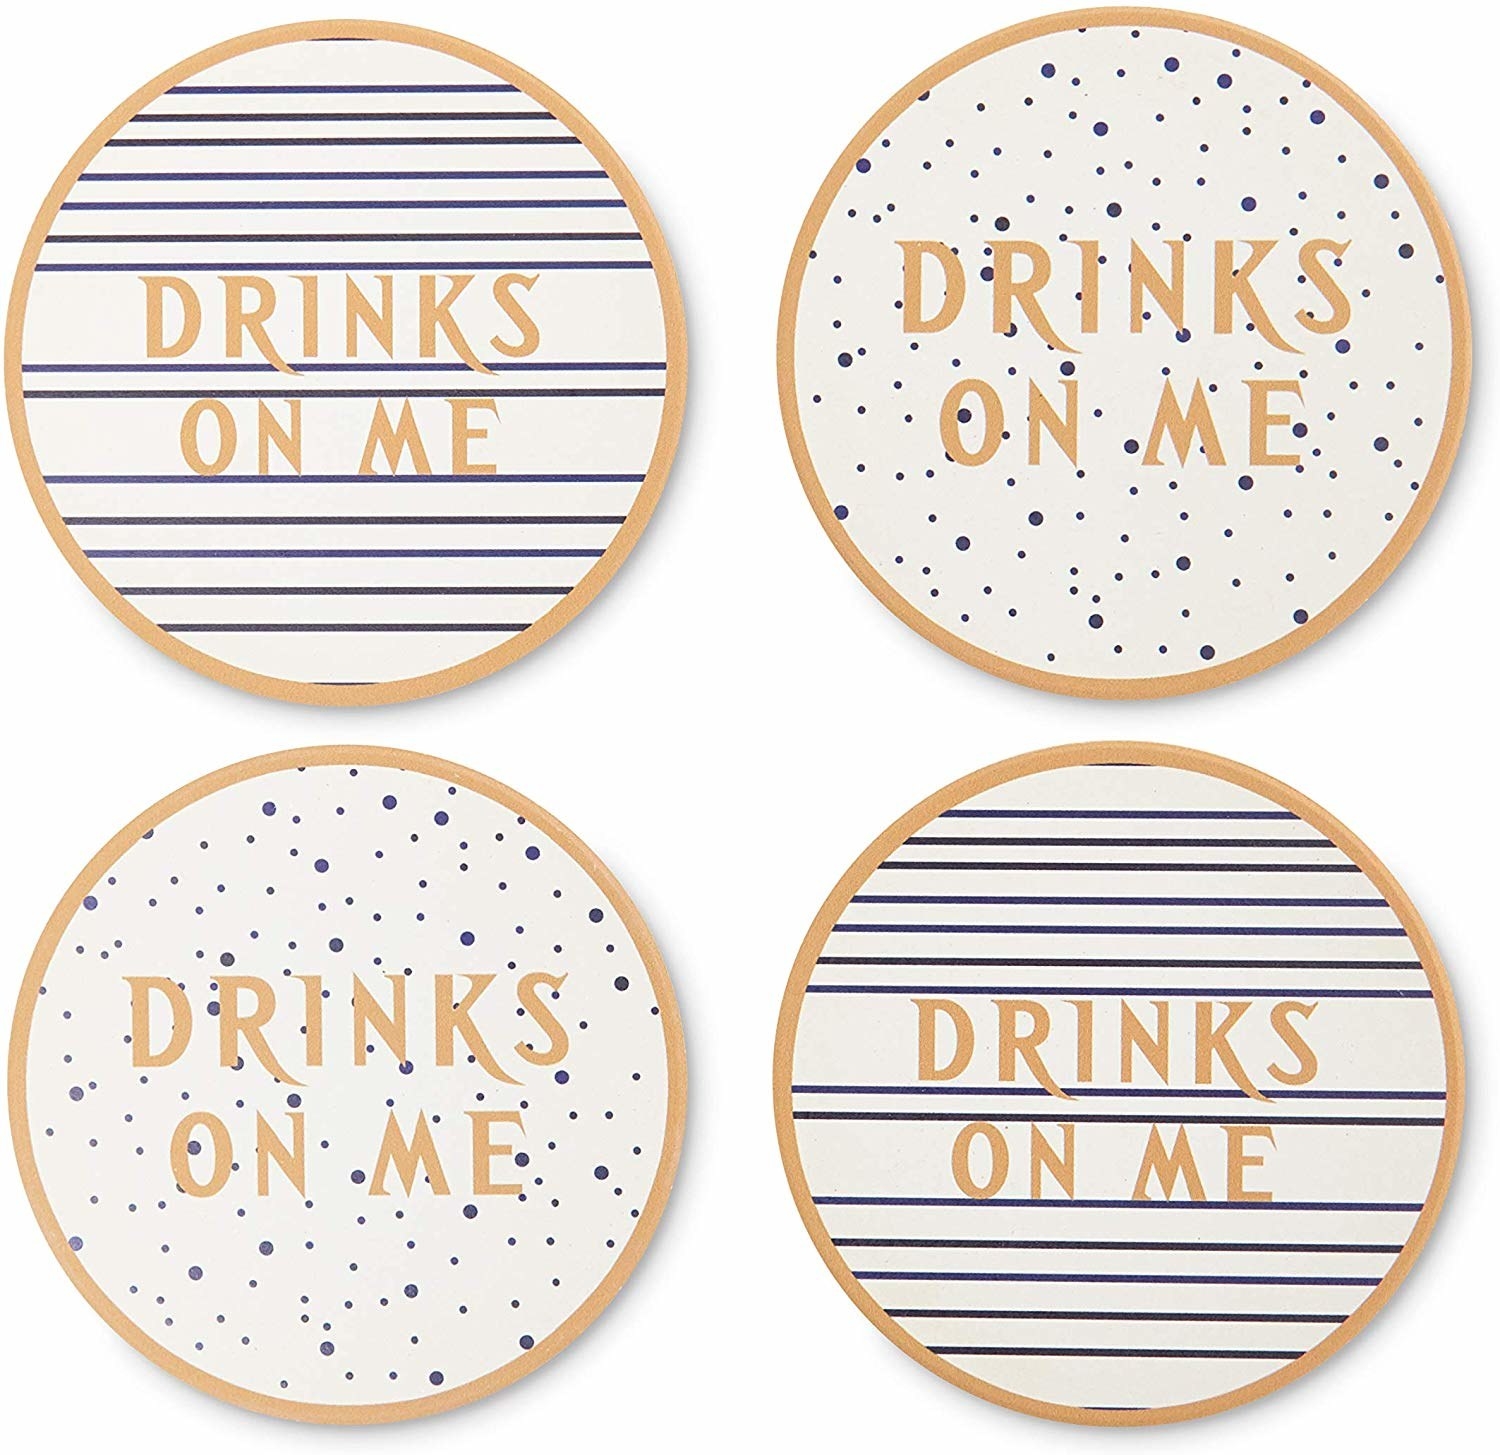 The four coasters, two stripe and two dotted that each say &quot;drinks on me&quot;